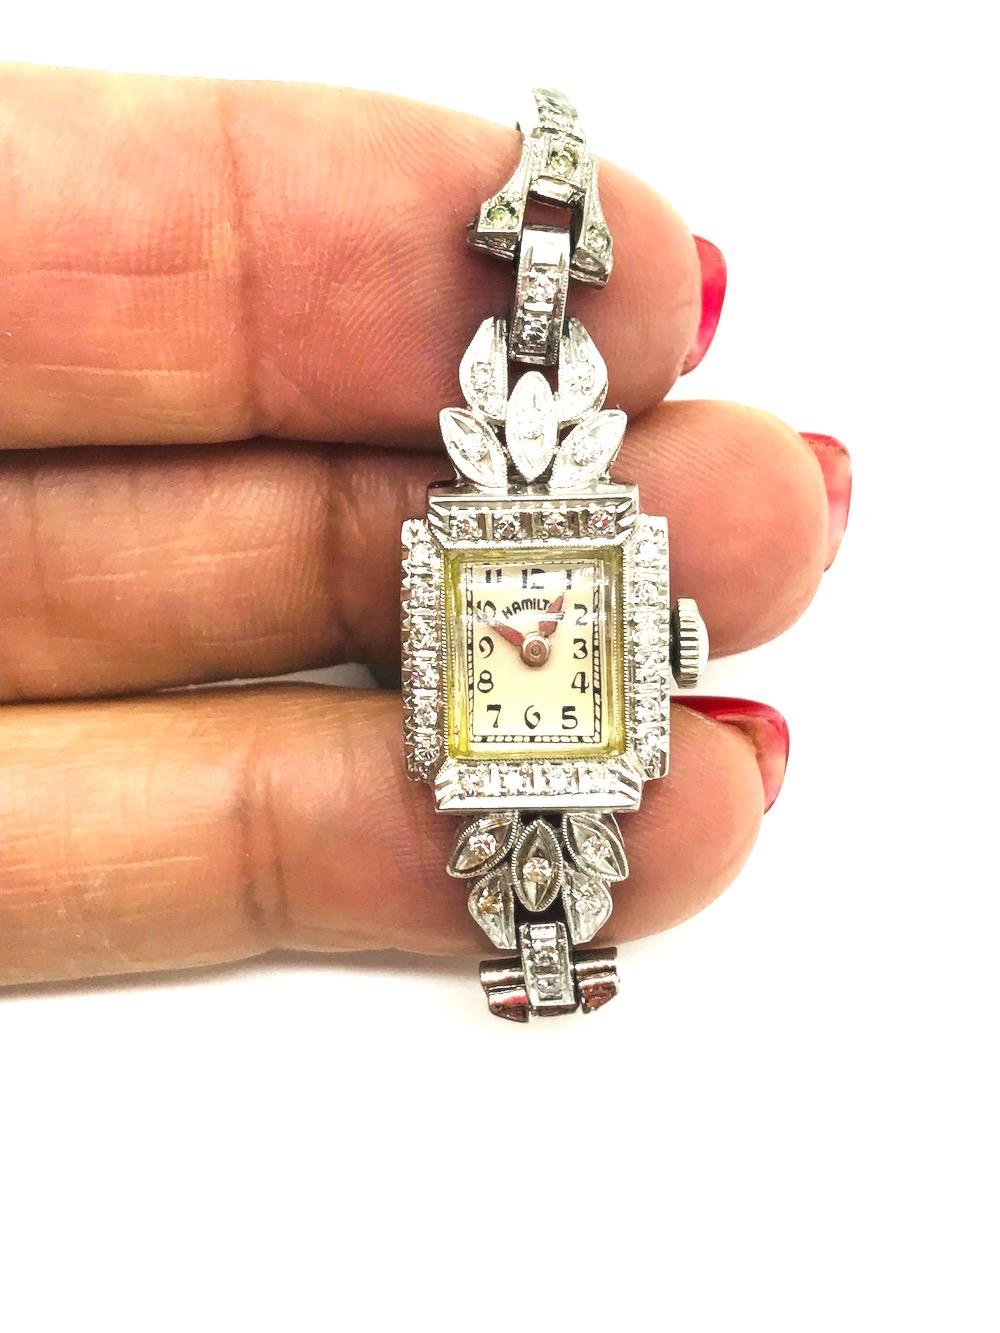 Hamilton, Diamond Encrusted 1920's Watch, 17 Jeweled
 Manual wind movement number 373041a 235484 case number. Dial is in good condition, painted white with black markers<br. (30) round single cut diamonds encrusted bezel of watch and lugs. Total